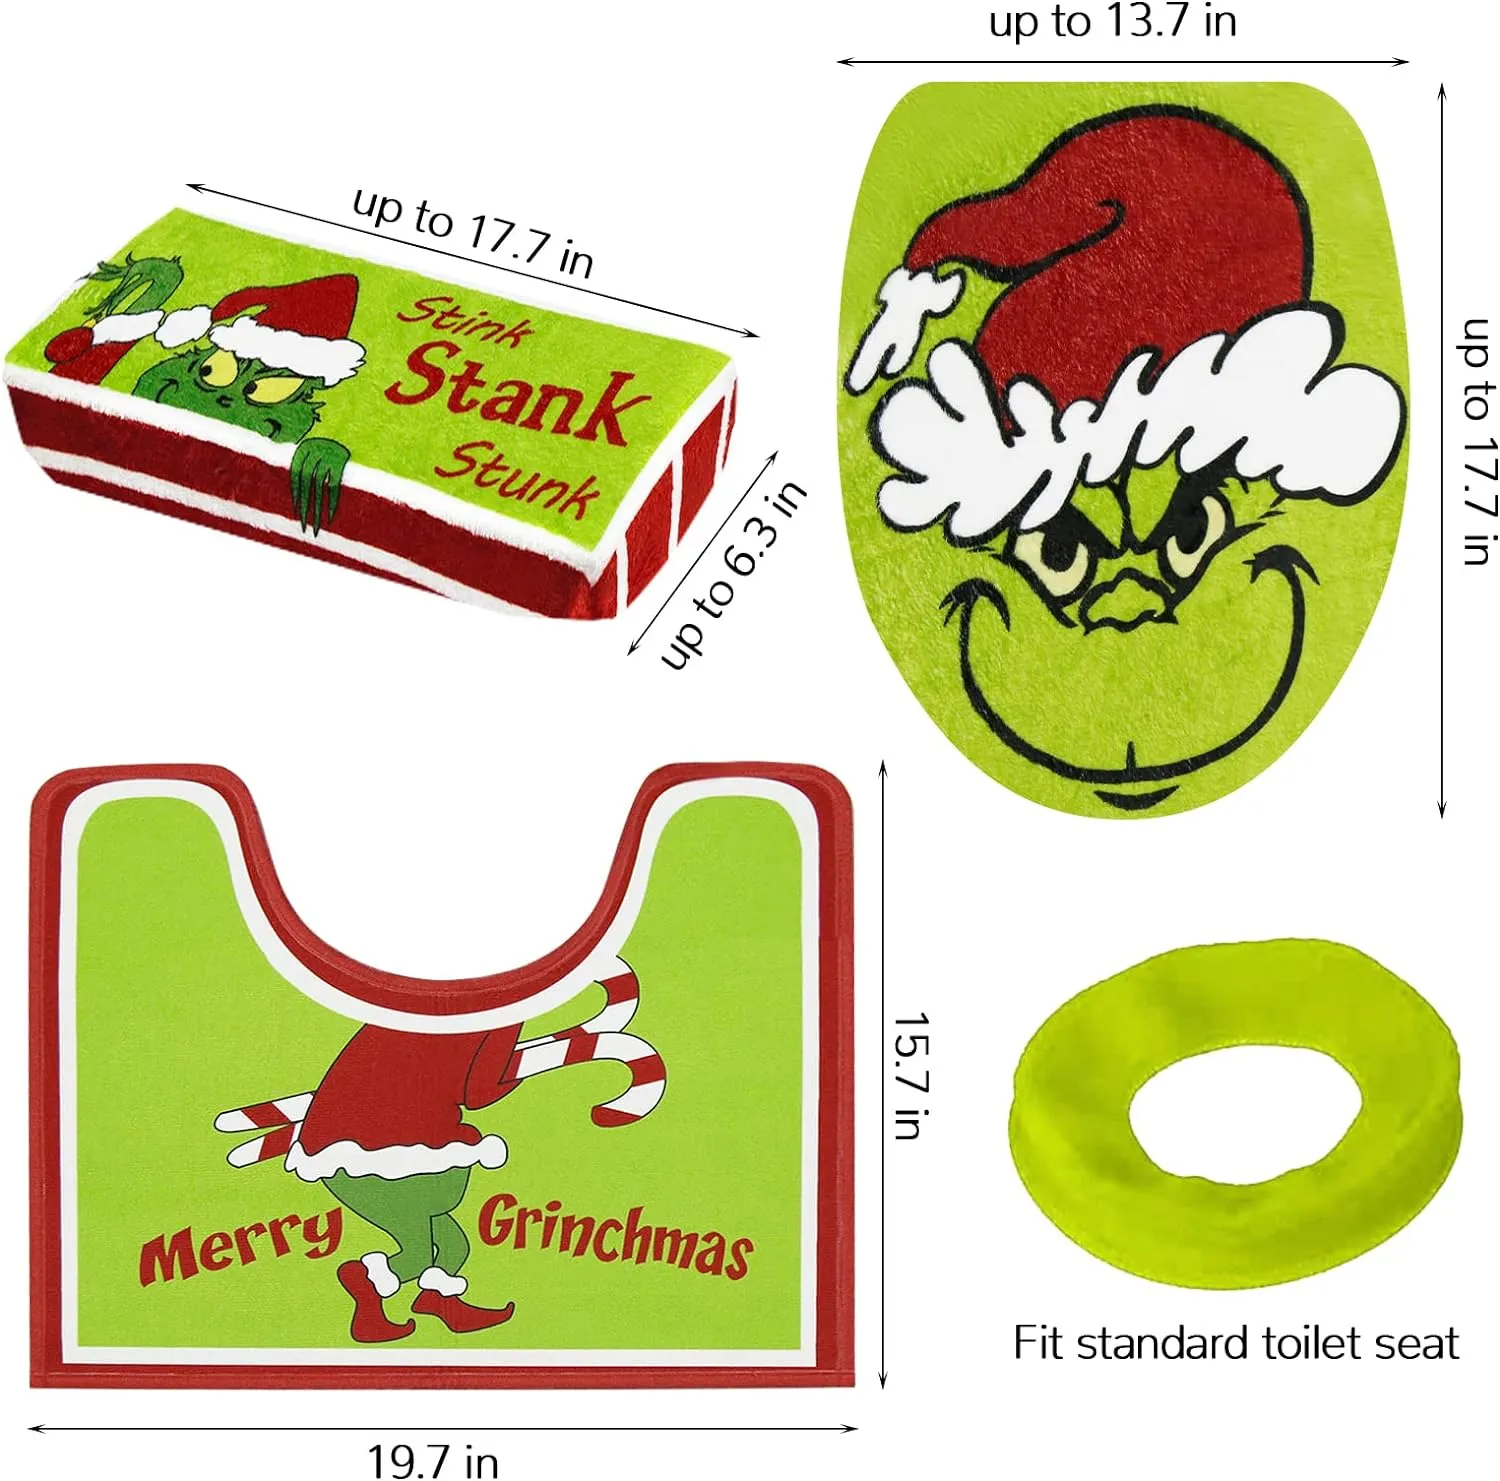 Grinch Christmas Decorations Xmas Bathroom Sets Grinchs Decor Toilet Seat Cover and Rug for Indoor Home Set of 4 1018